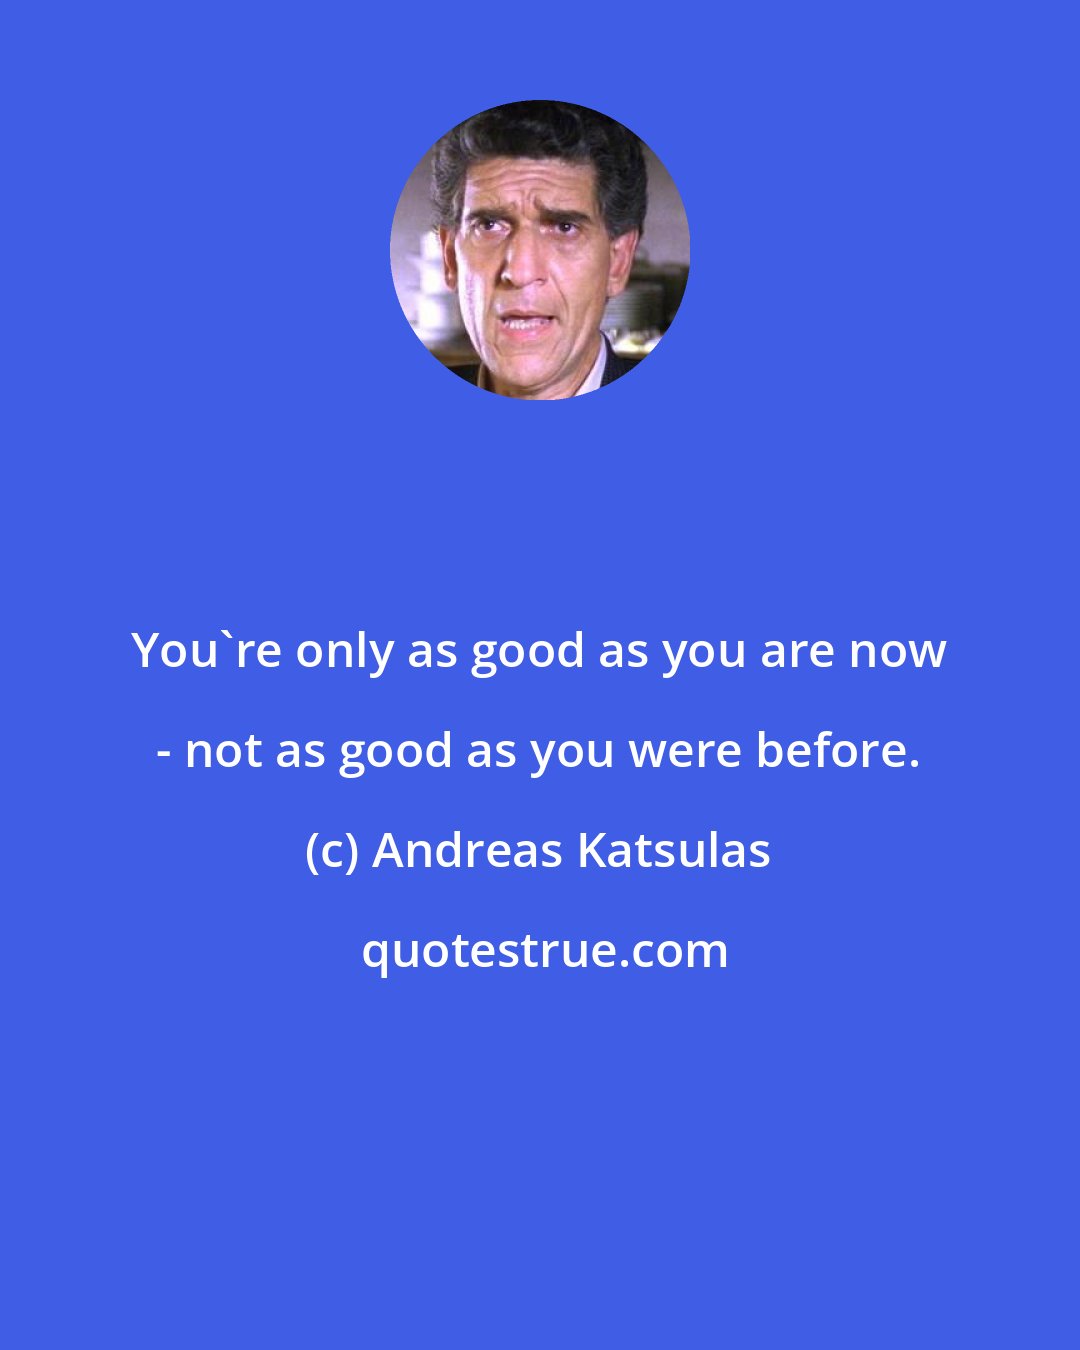 Andreas Katsulas: You're only as good as you are now - not as good as you were before.